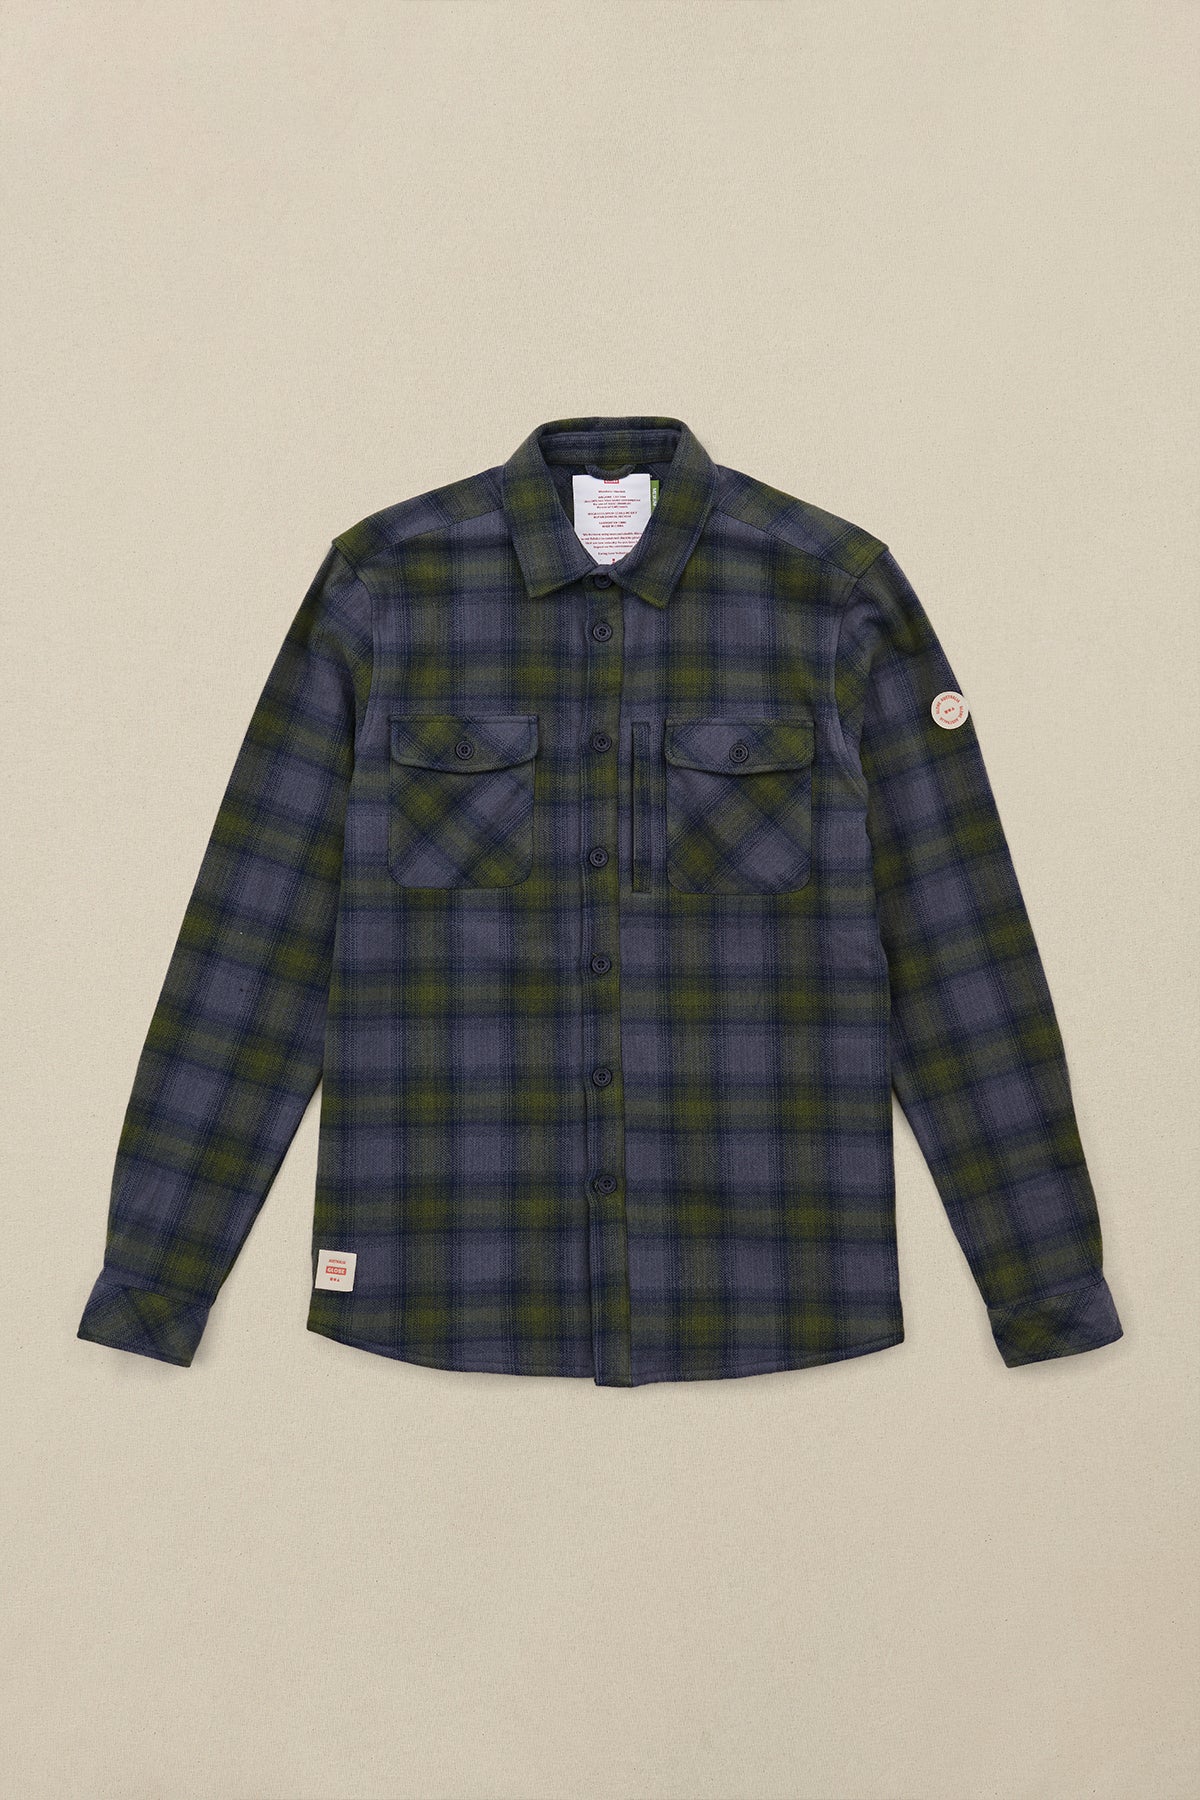 front facing Navy Globe button up jacket